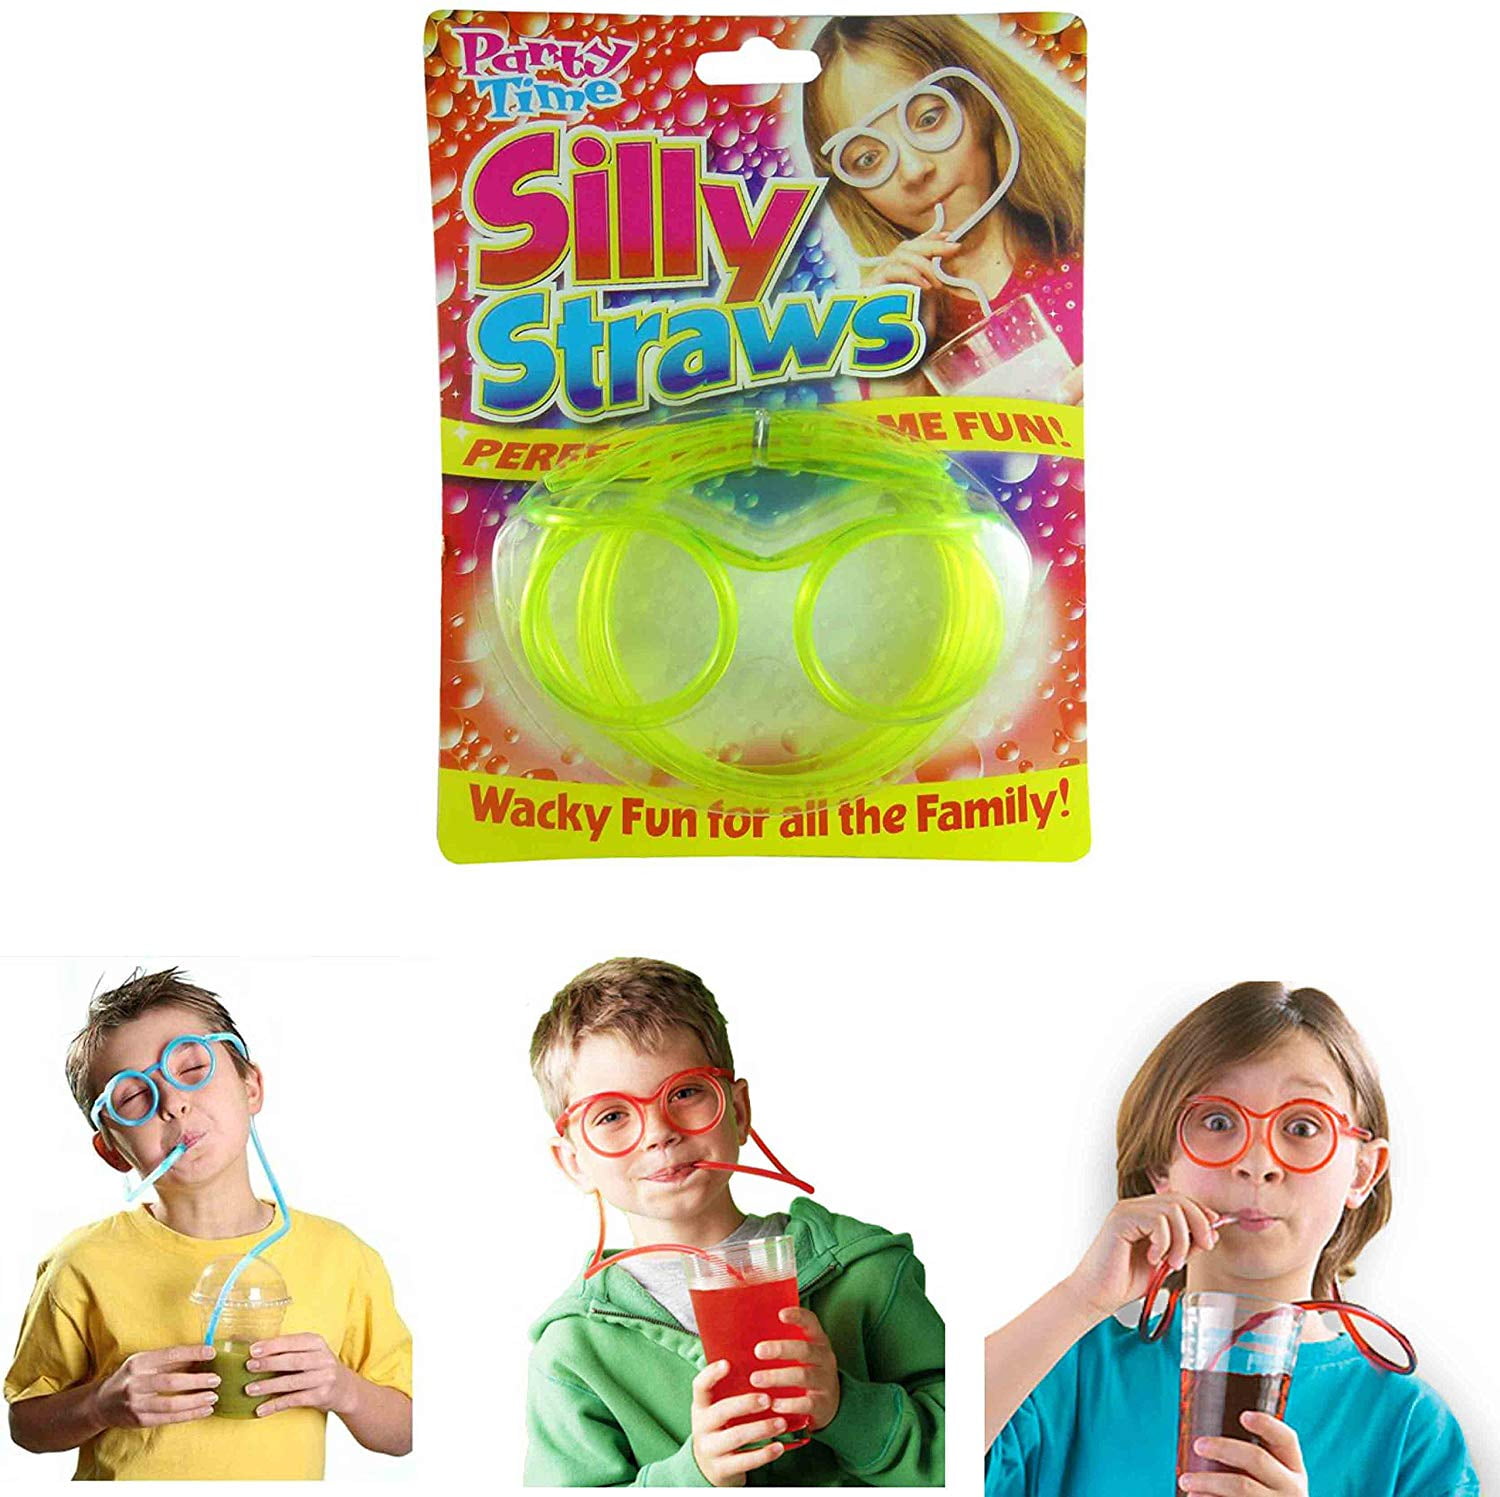 8pcs random colors Boys Girls Teen Funny Flexible Drinking Straw Glasses  Decorative Accessories For Birthday Party Supplies Favors Game Black Friday  Christmas New Year